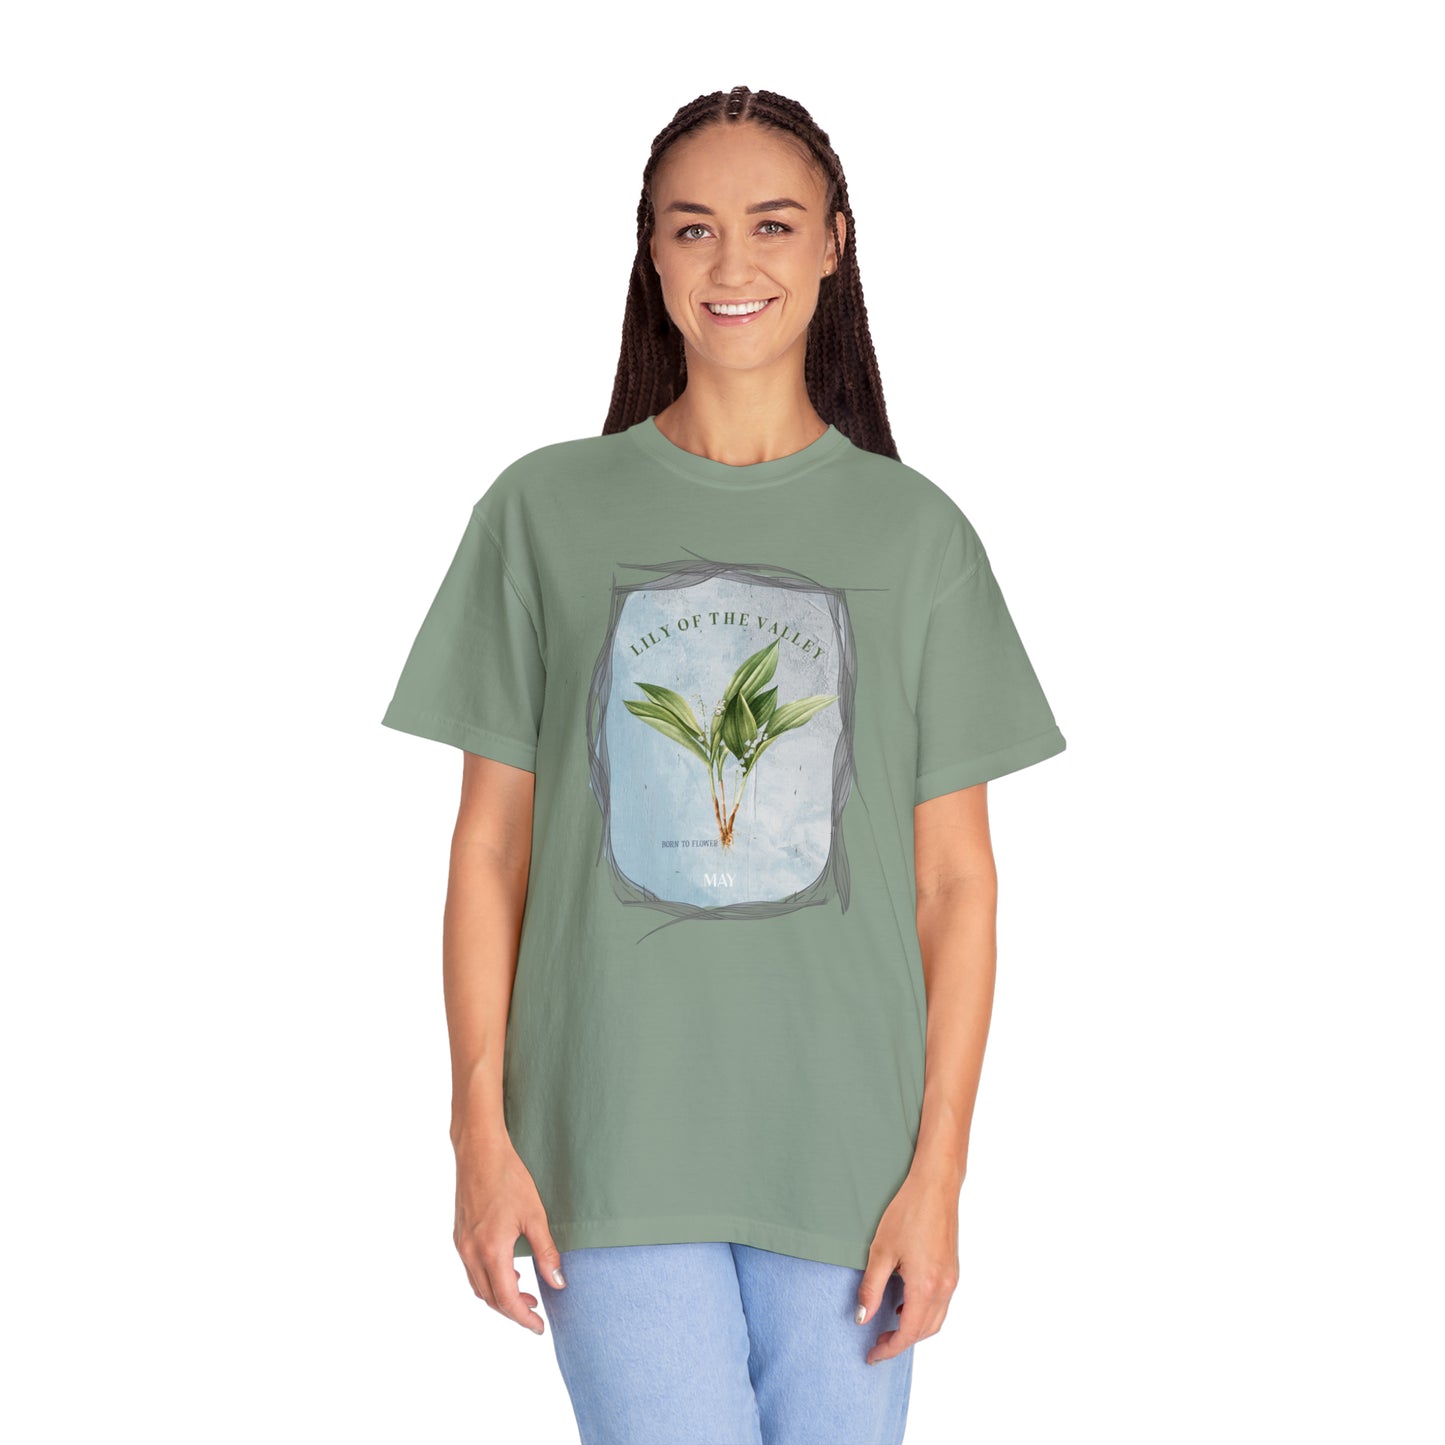 born to flower graphic tee - may